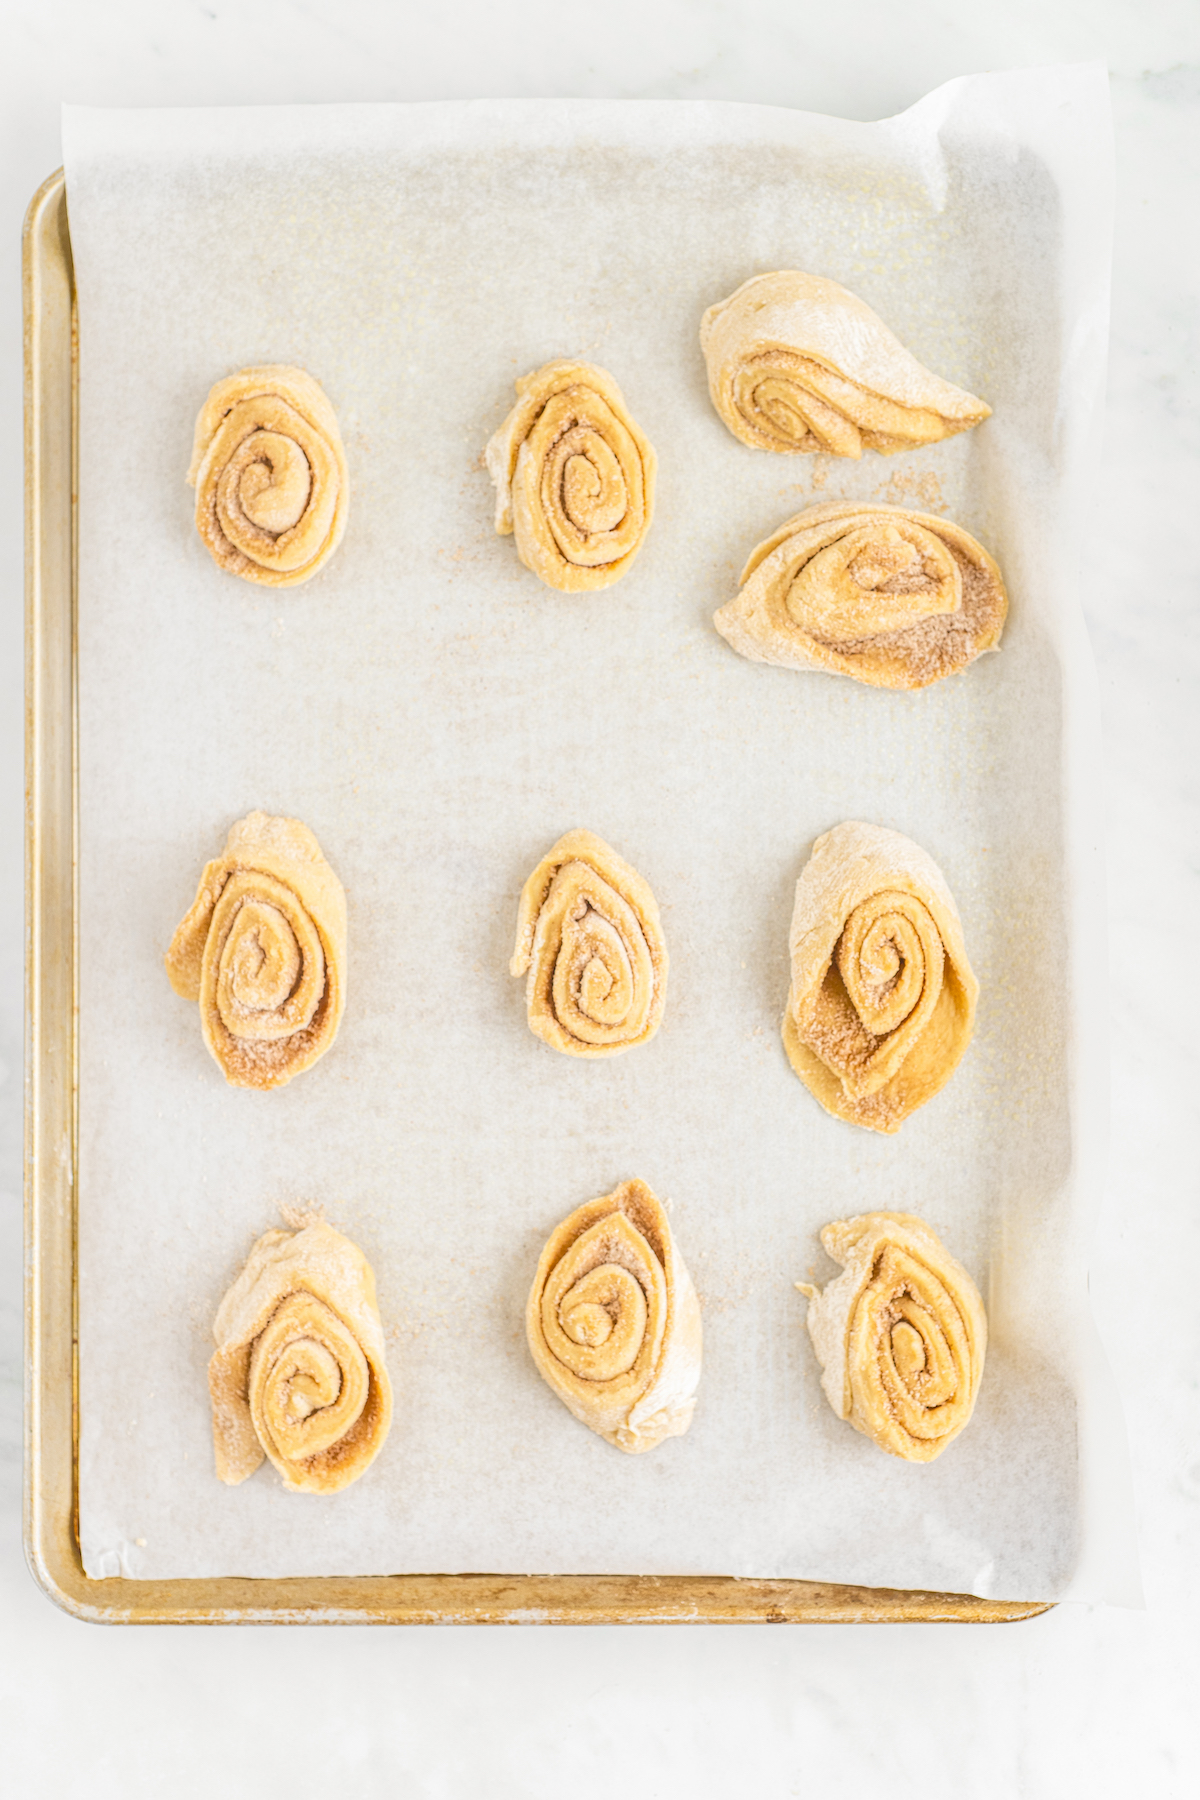 Unbaked sticky buns on a parchment-lined baking sheet.